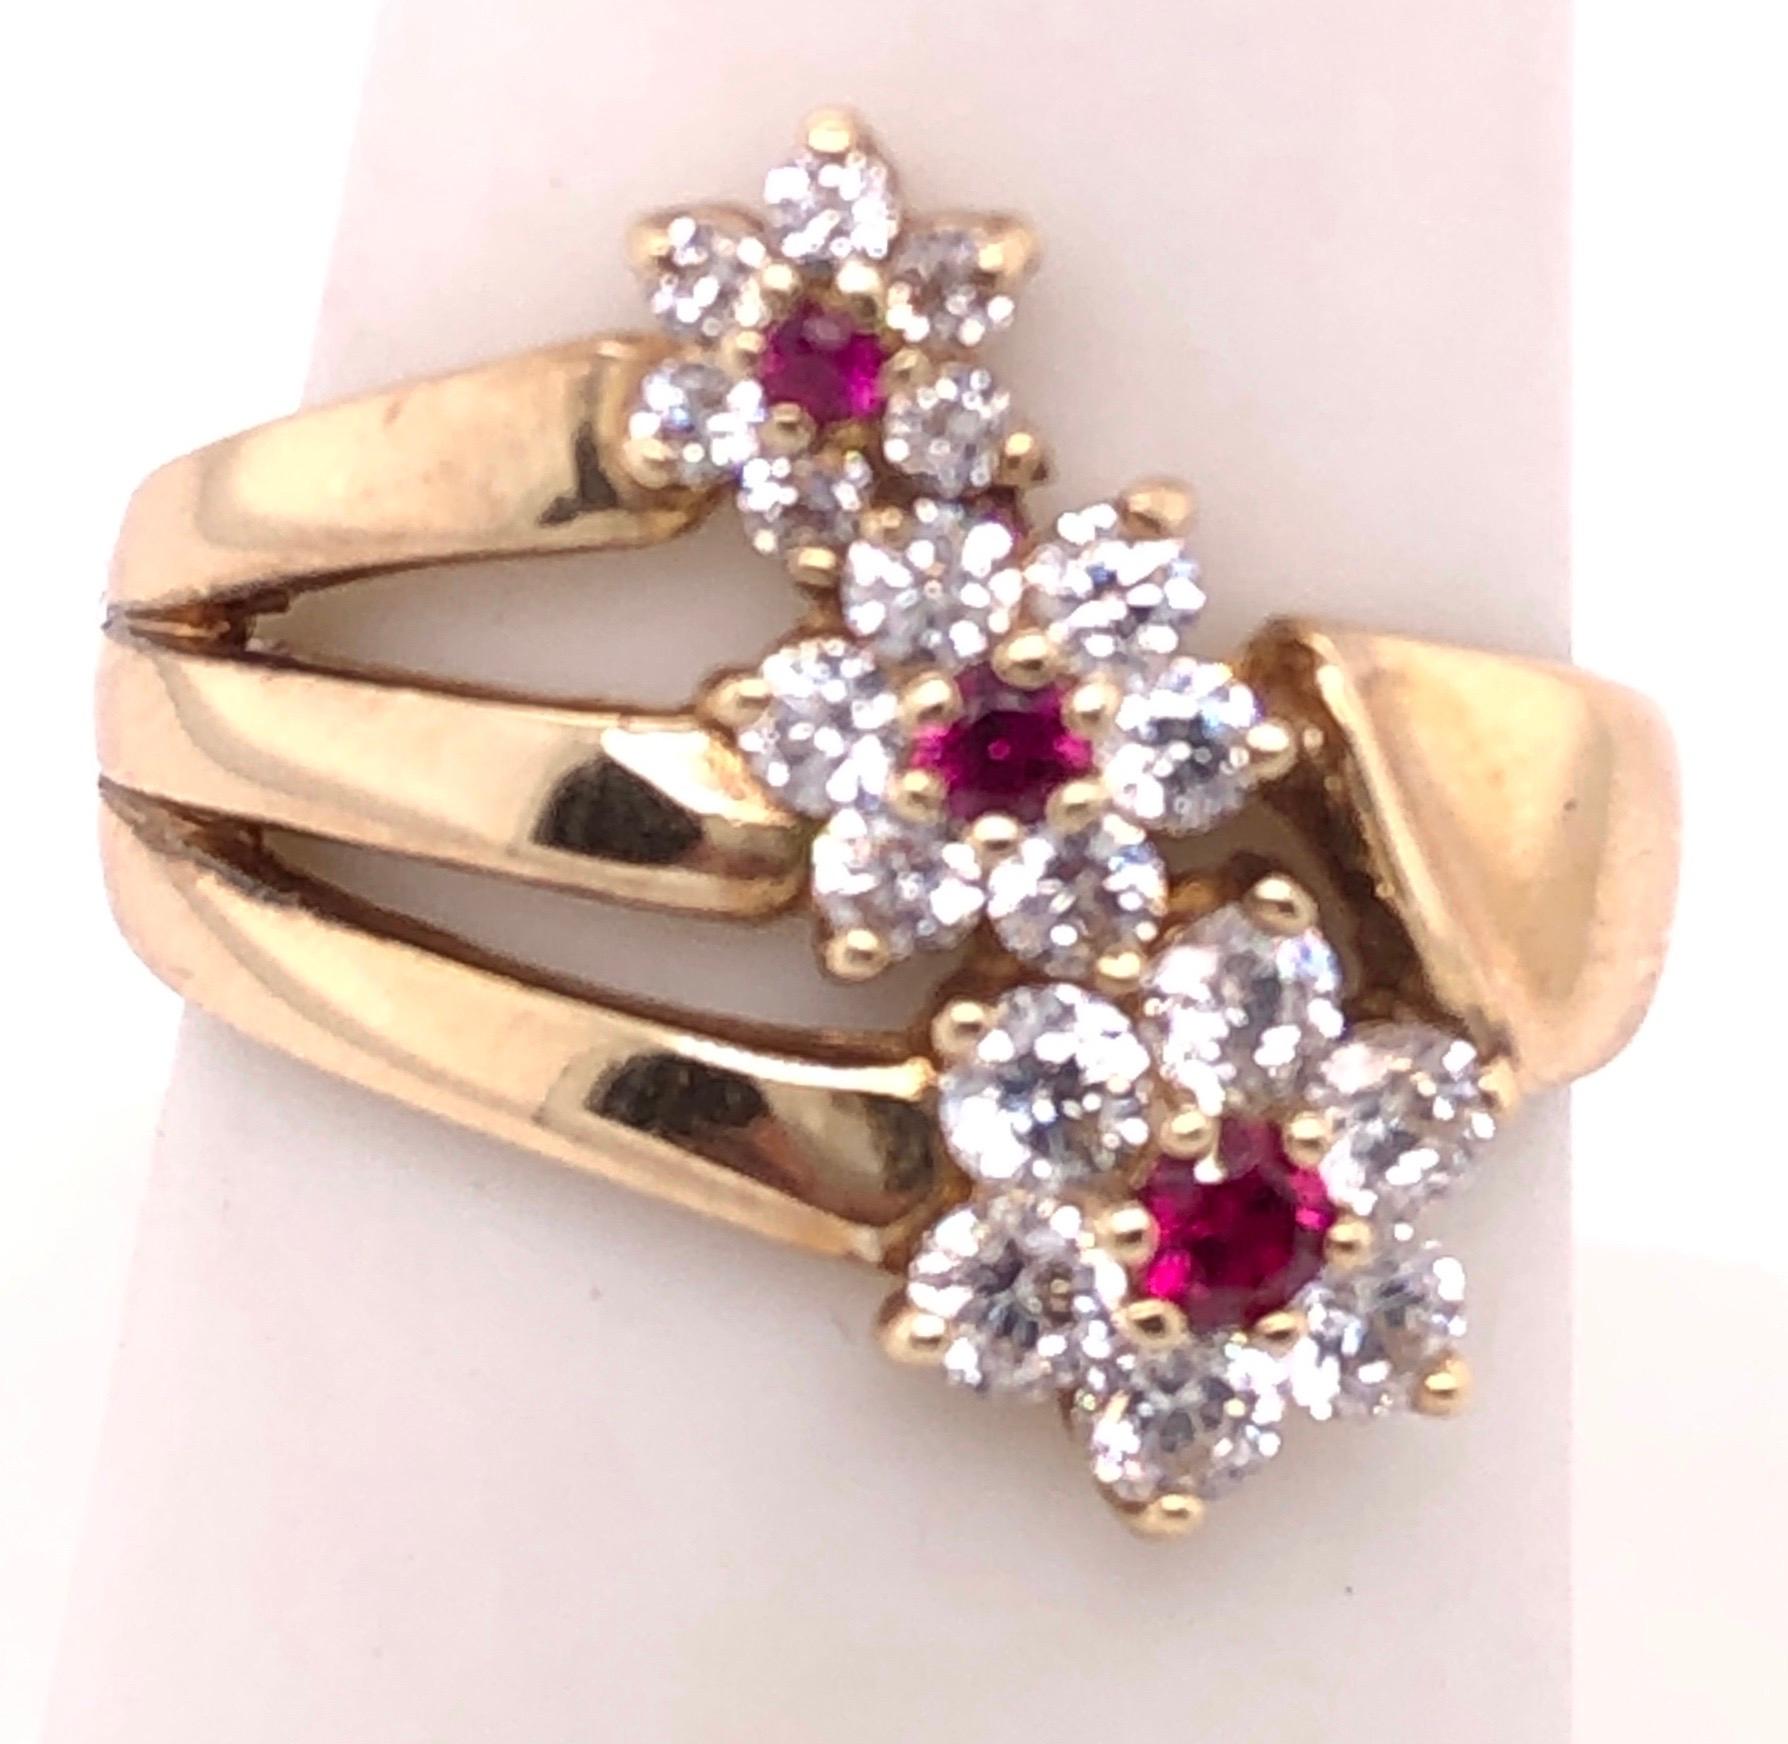 14 Karat Yellow Gold Fashion Three Flower Ring with Semi Precious Stones
Size 7.25
4.76 grams total weight.